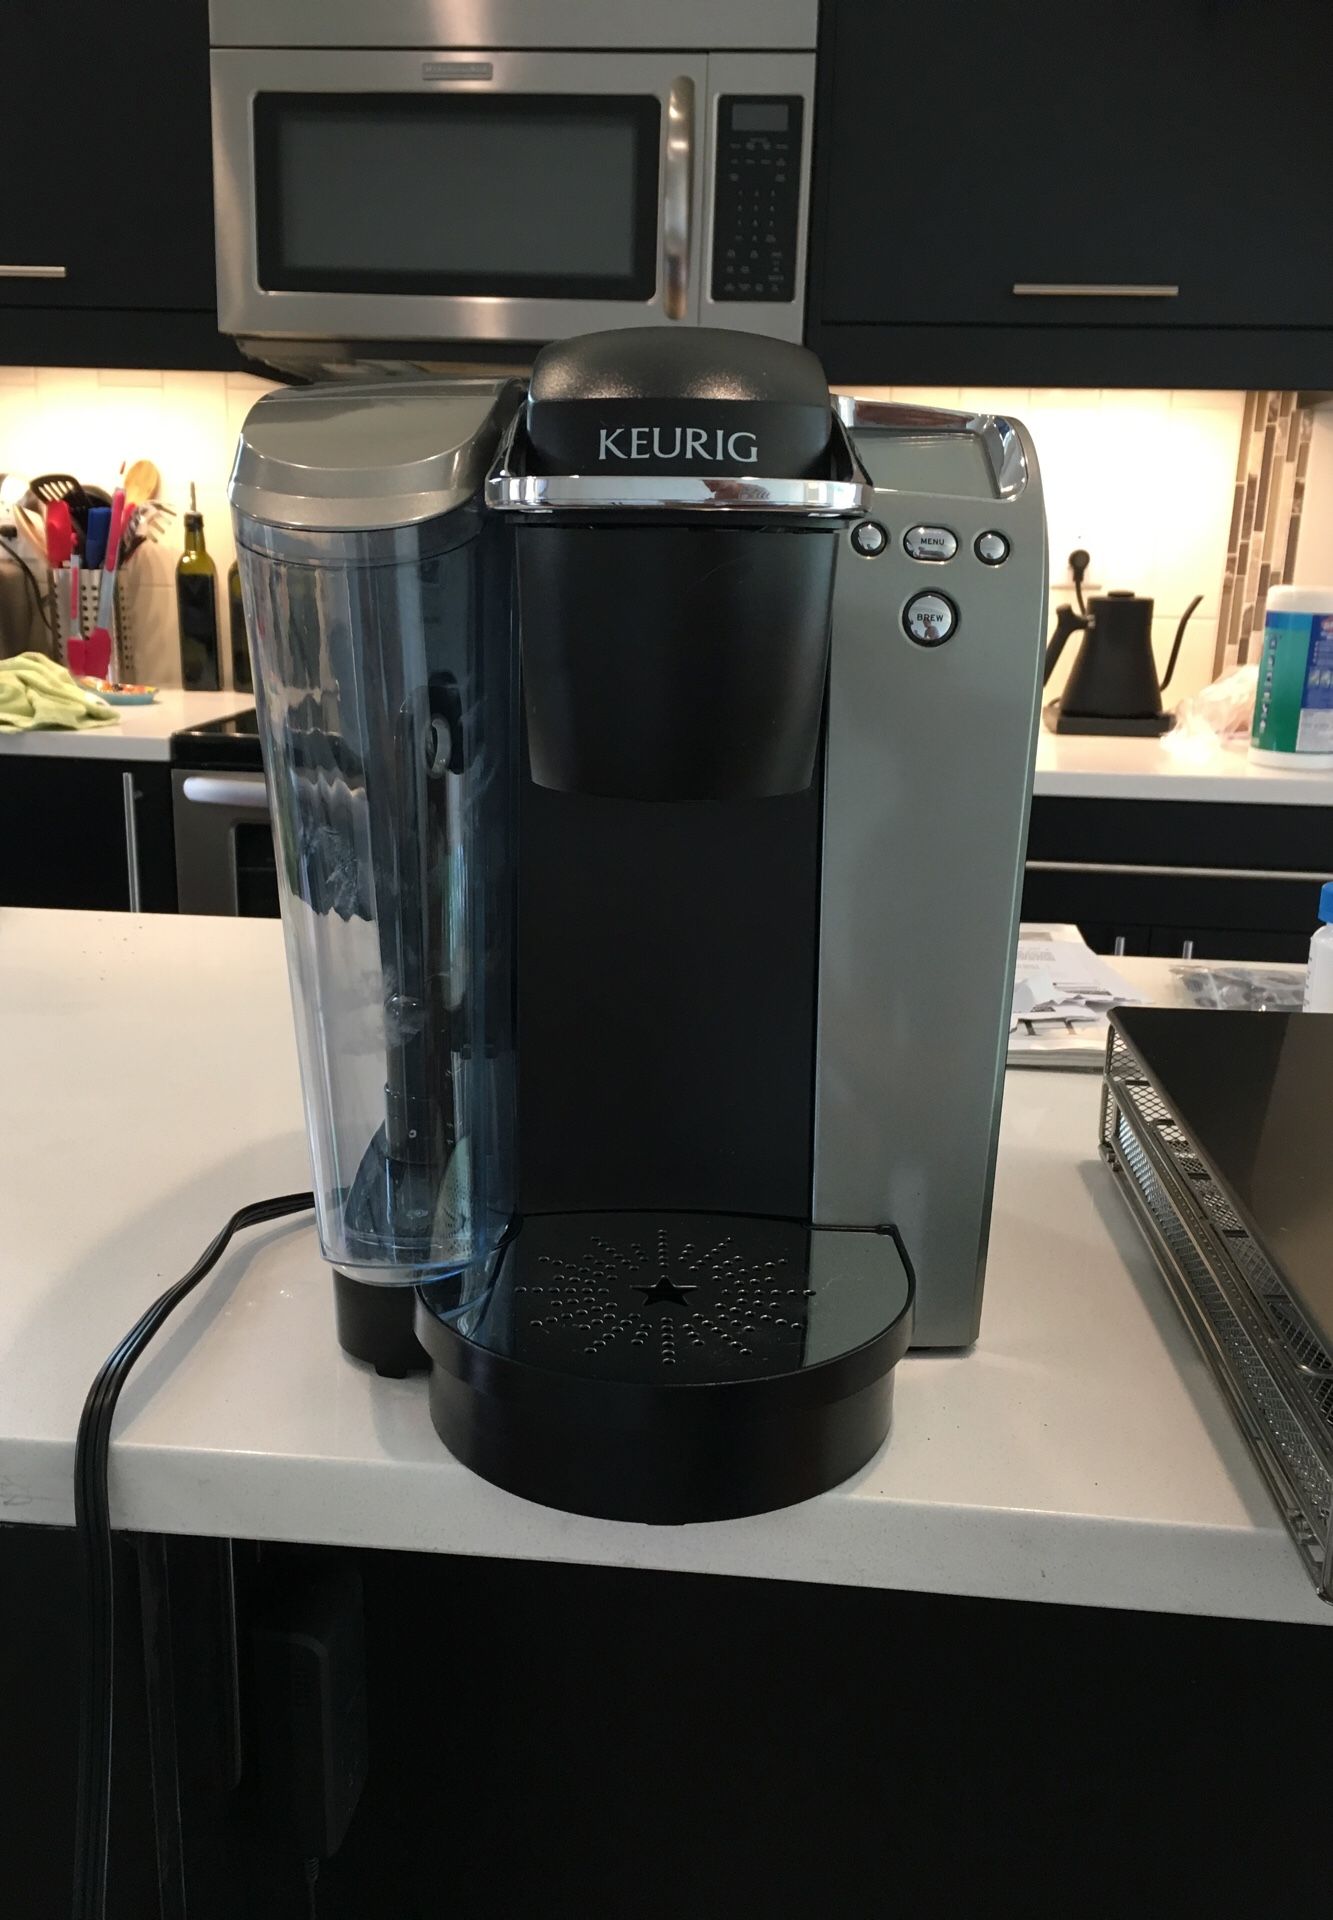 Keurig with k cup tray